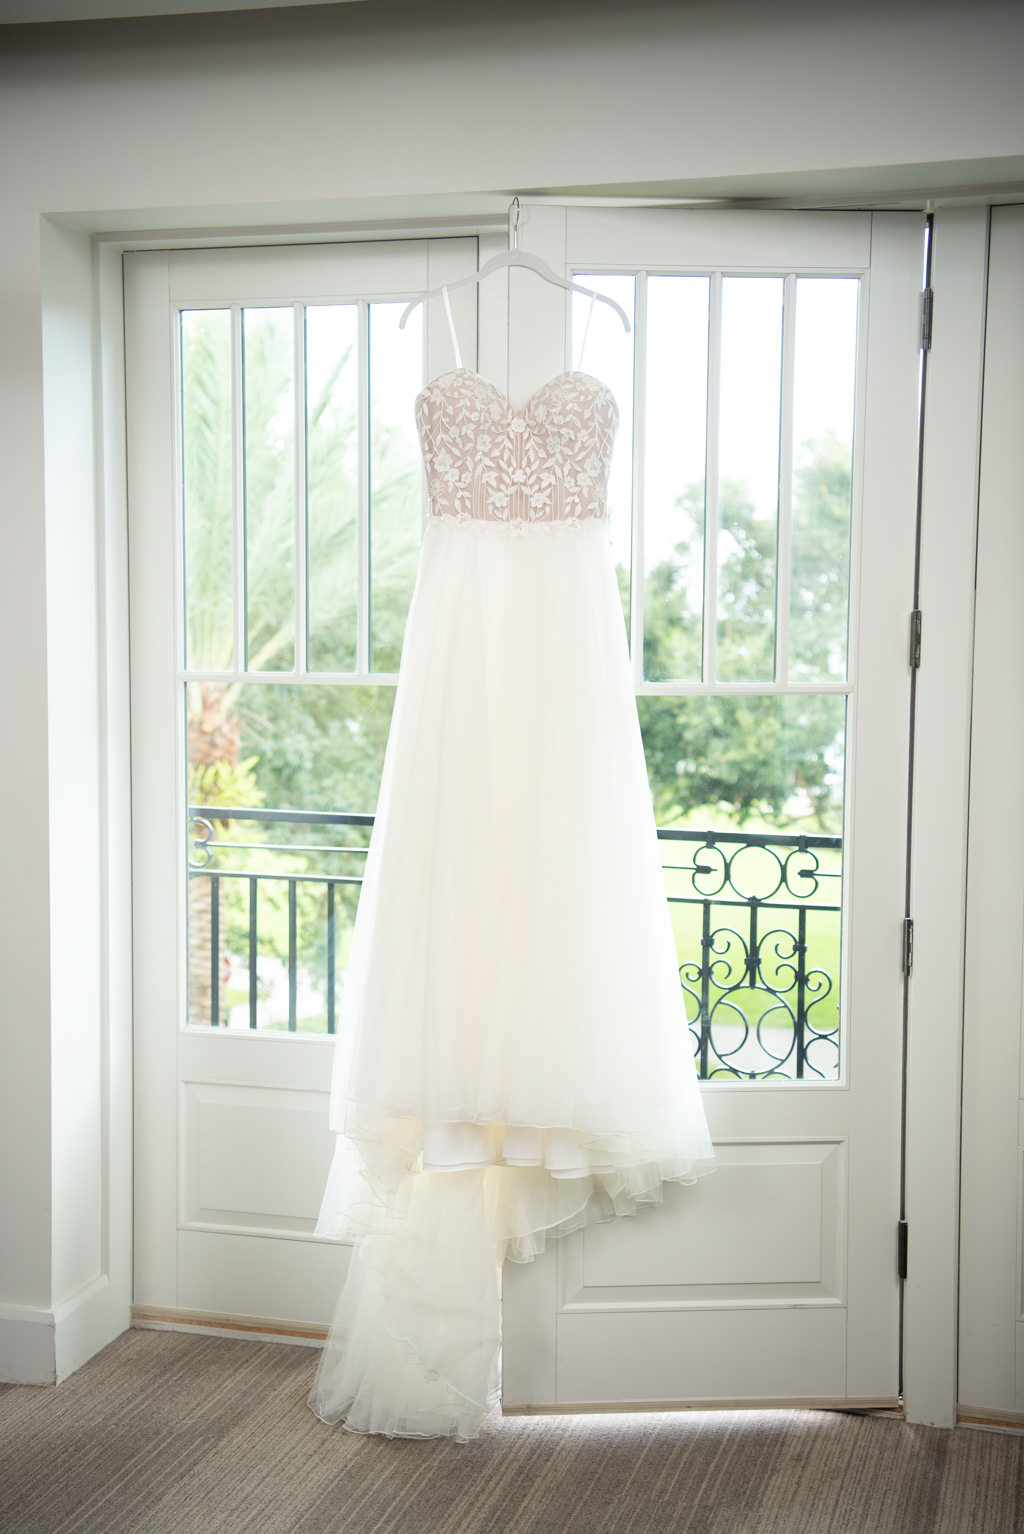 Romantic, White Strapless A-Line Sweetheart Wedding Dress by Designer Justin Alexander, Detailed Fitted Floral Embellished Bodice with Tulle Skirt | St. Pete Boutique Hotel and Modern Wedding Venue The Birchwood